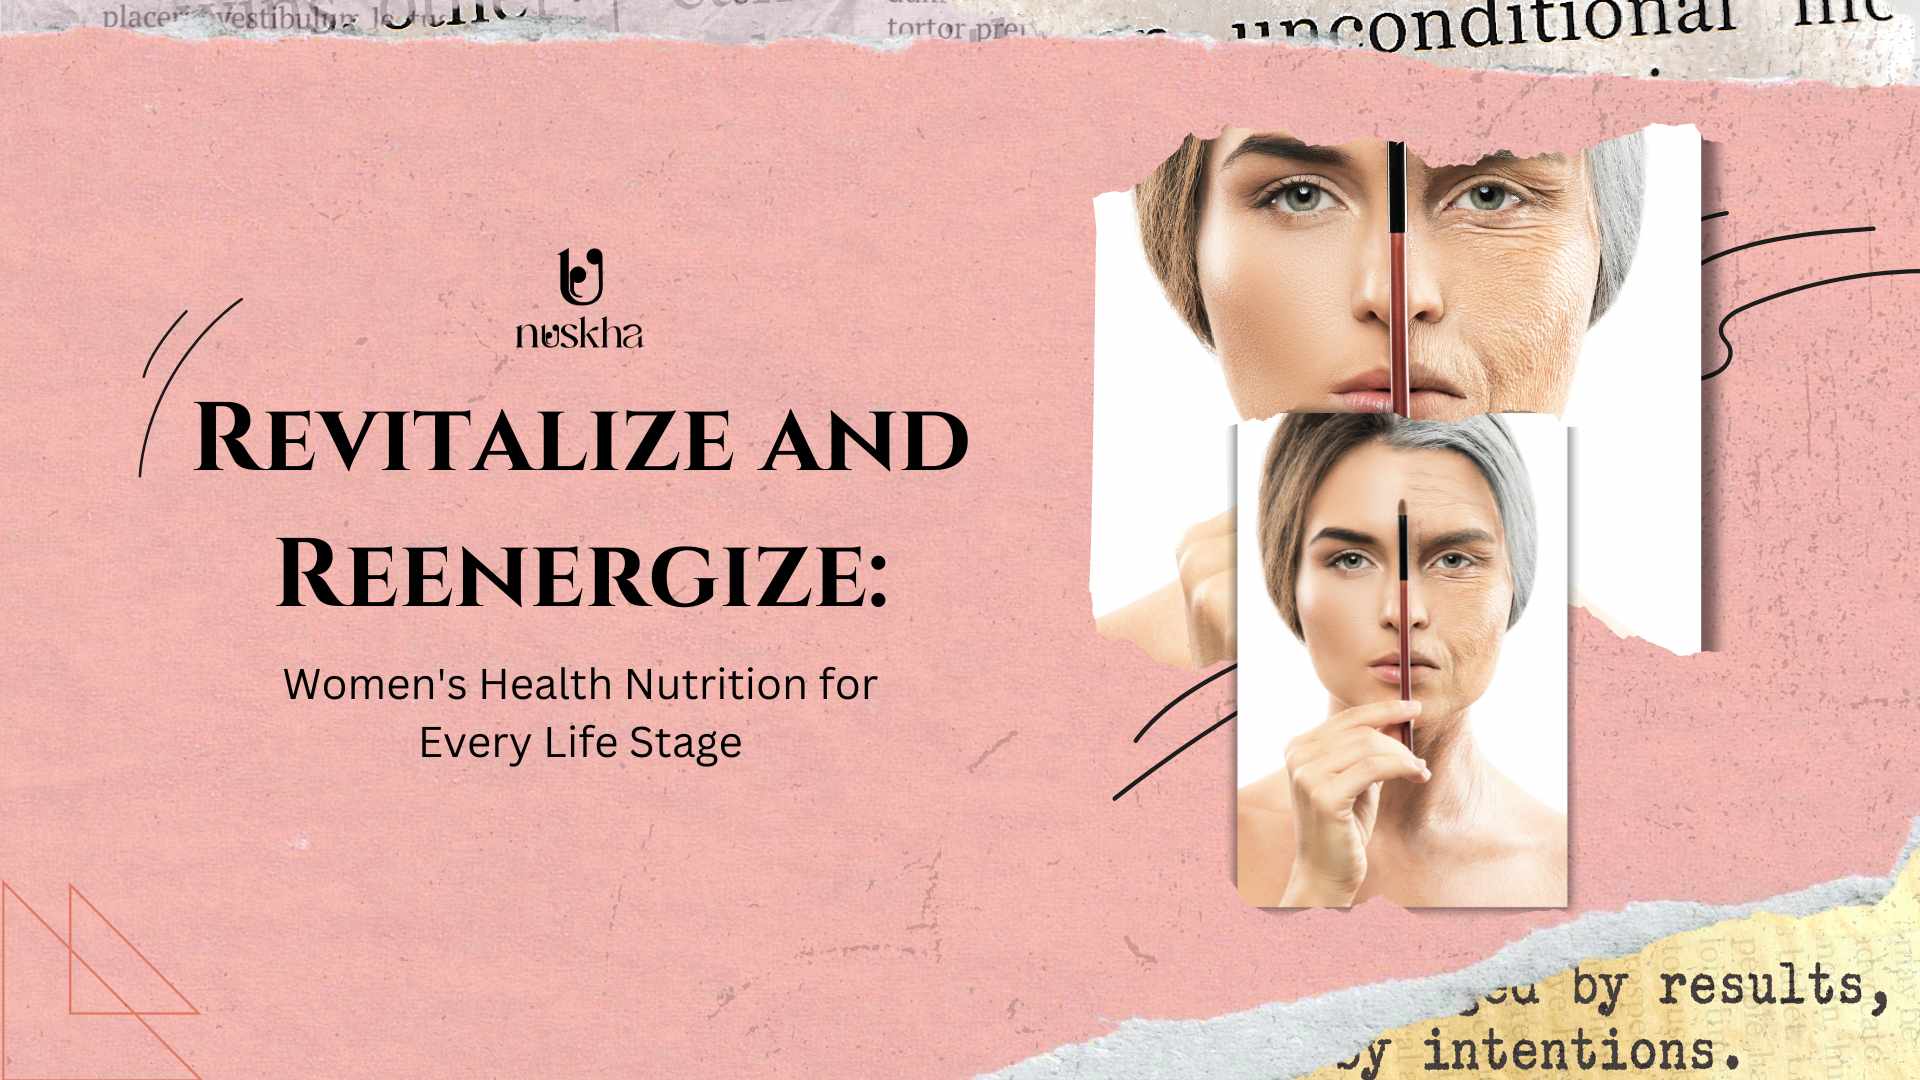 Revitalize and Reenergize: Women's Health Nutrition for Every Life Stage